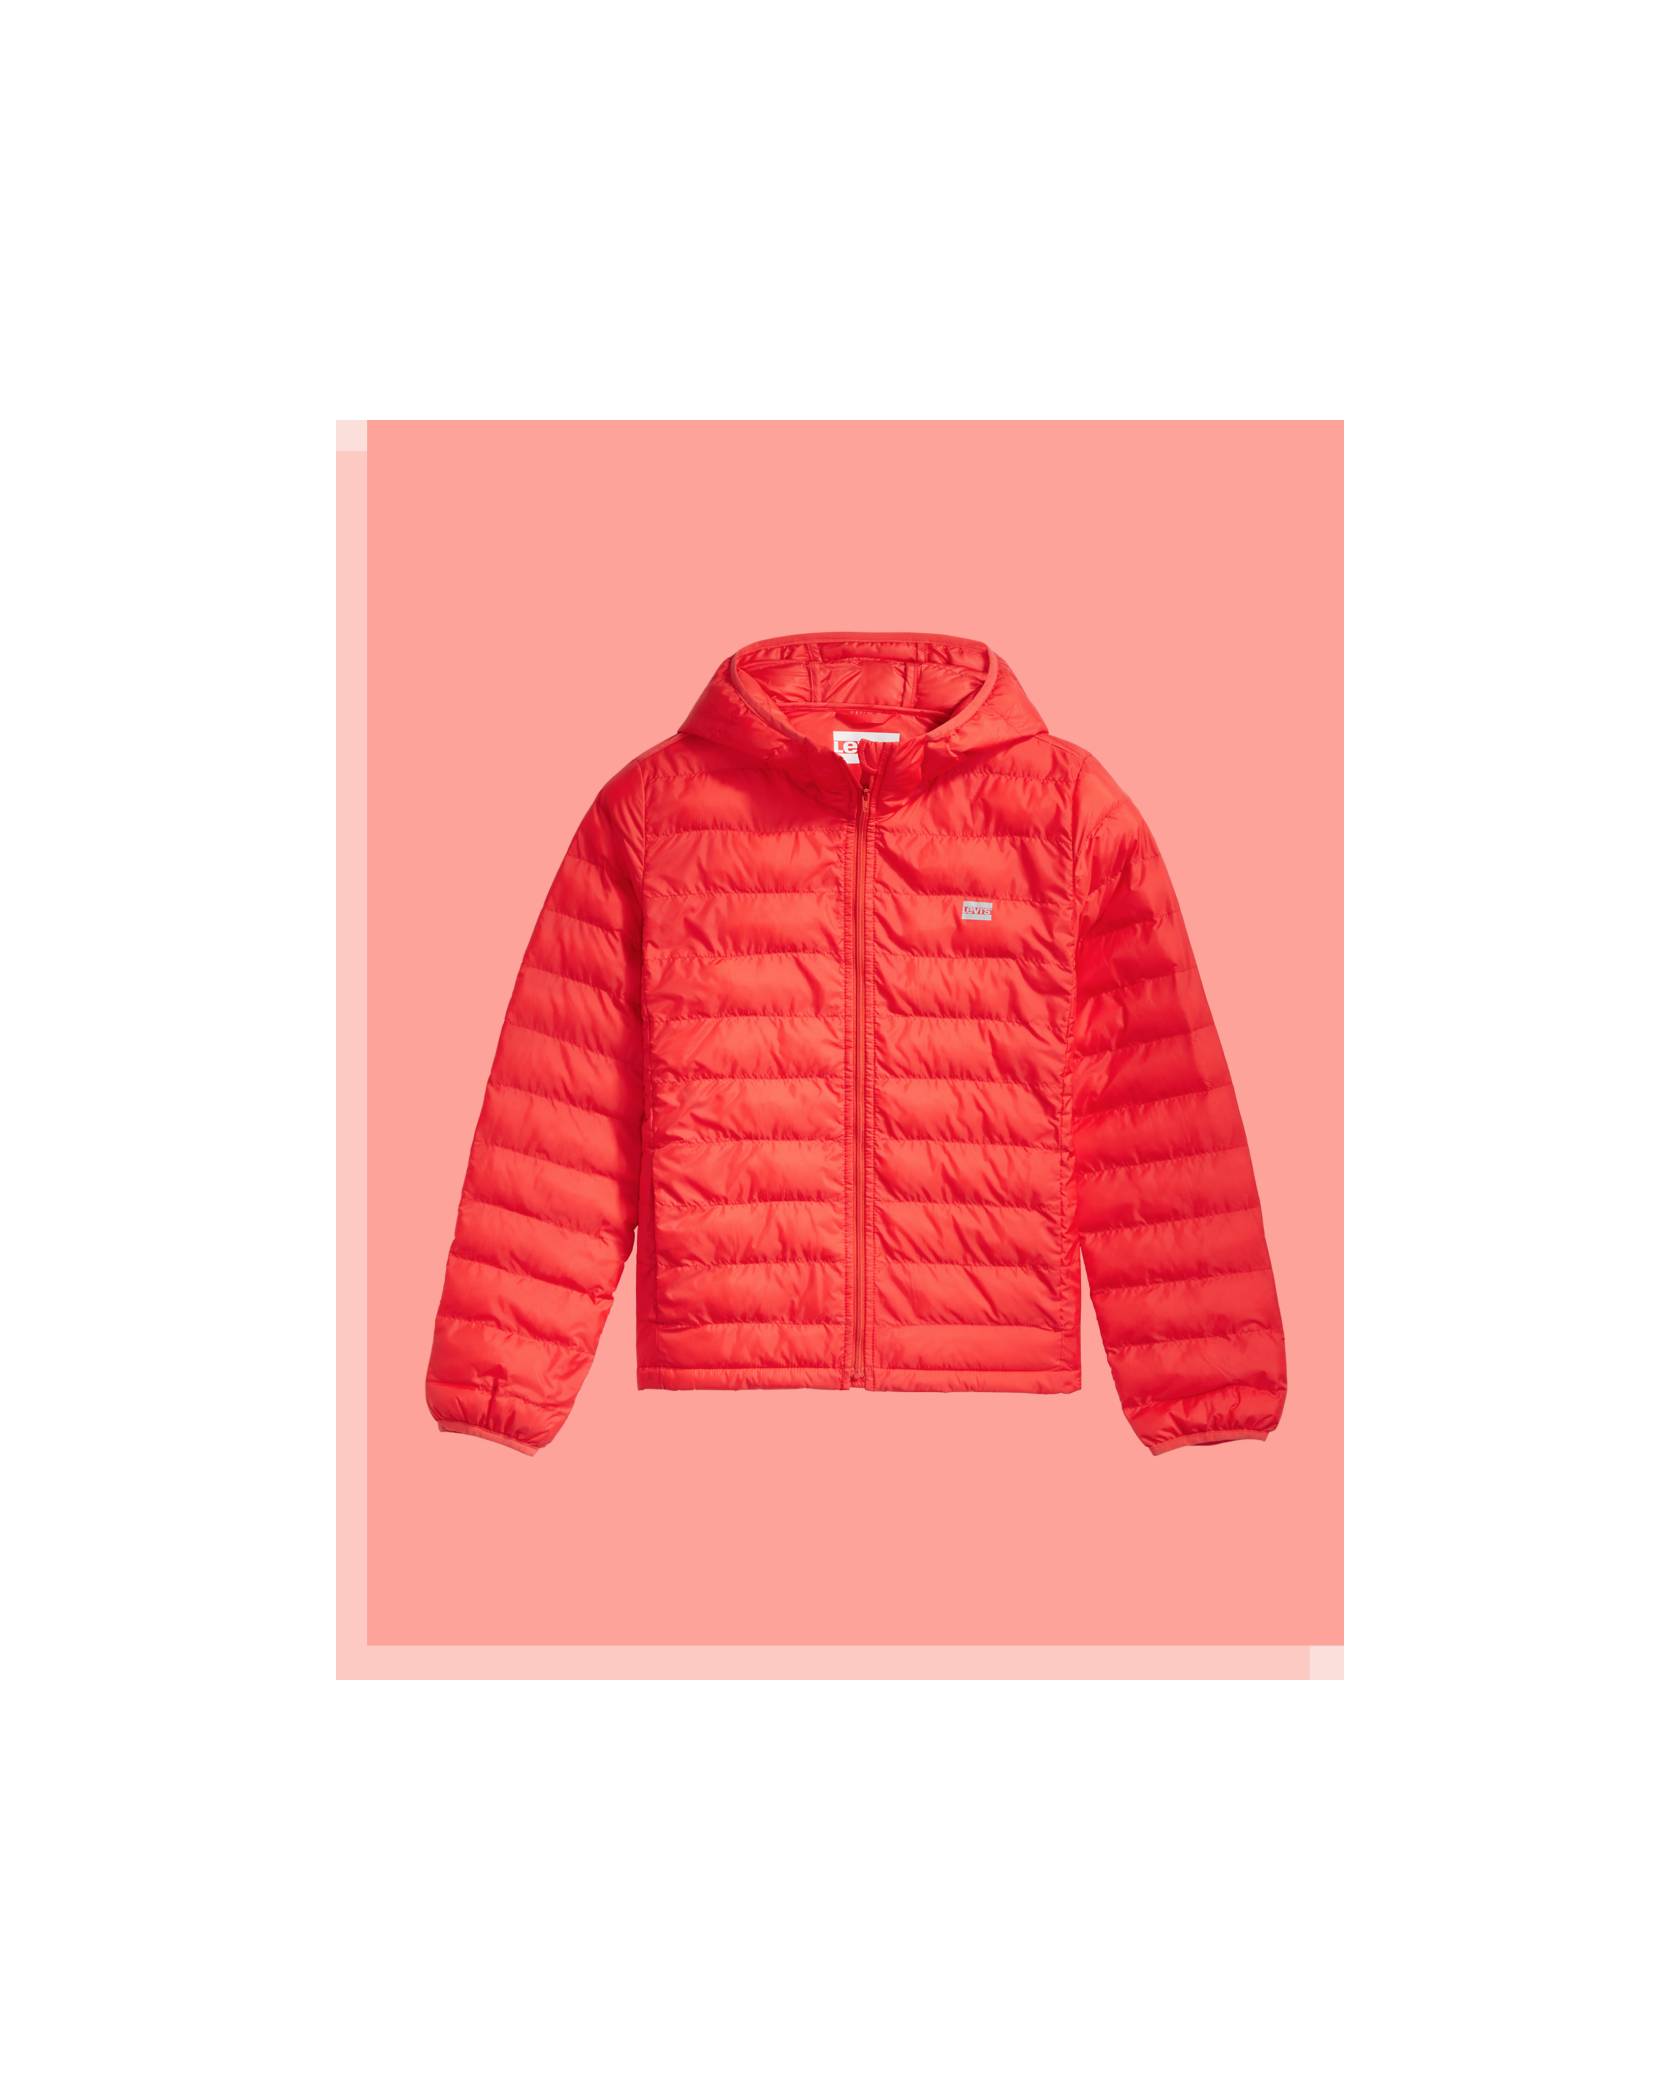 Red Levi's® puffer jacket